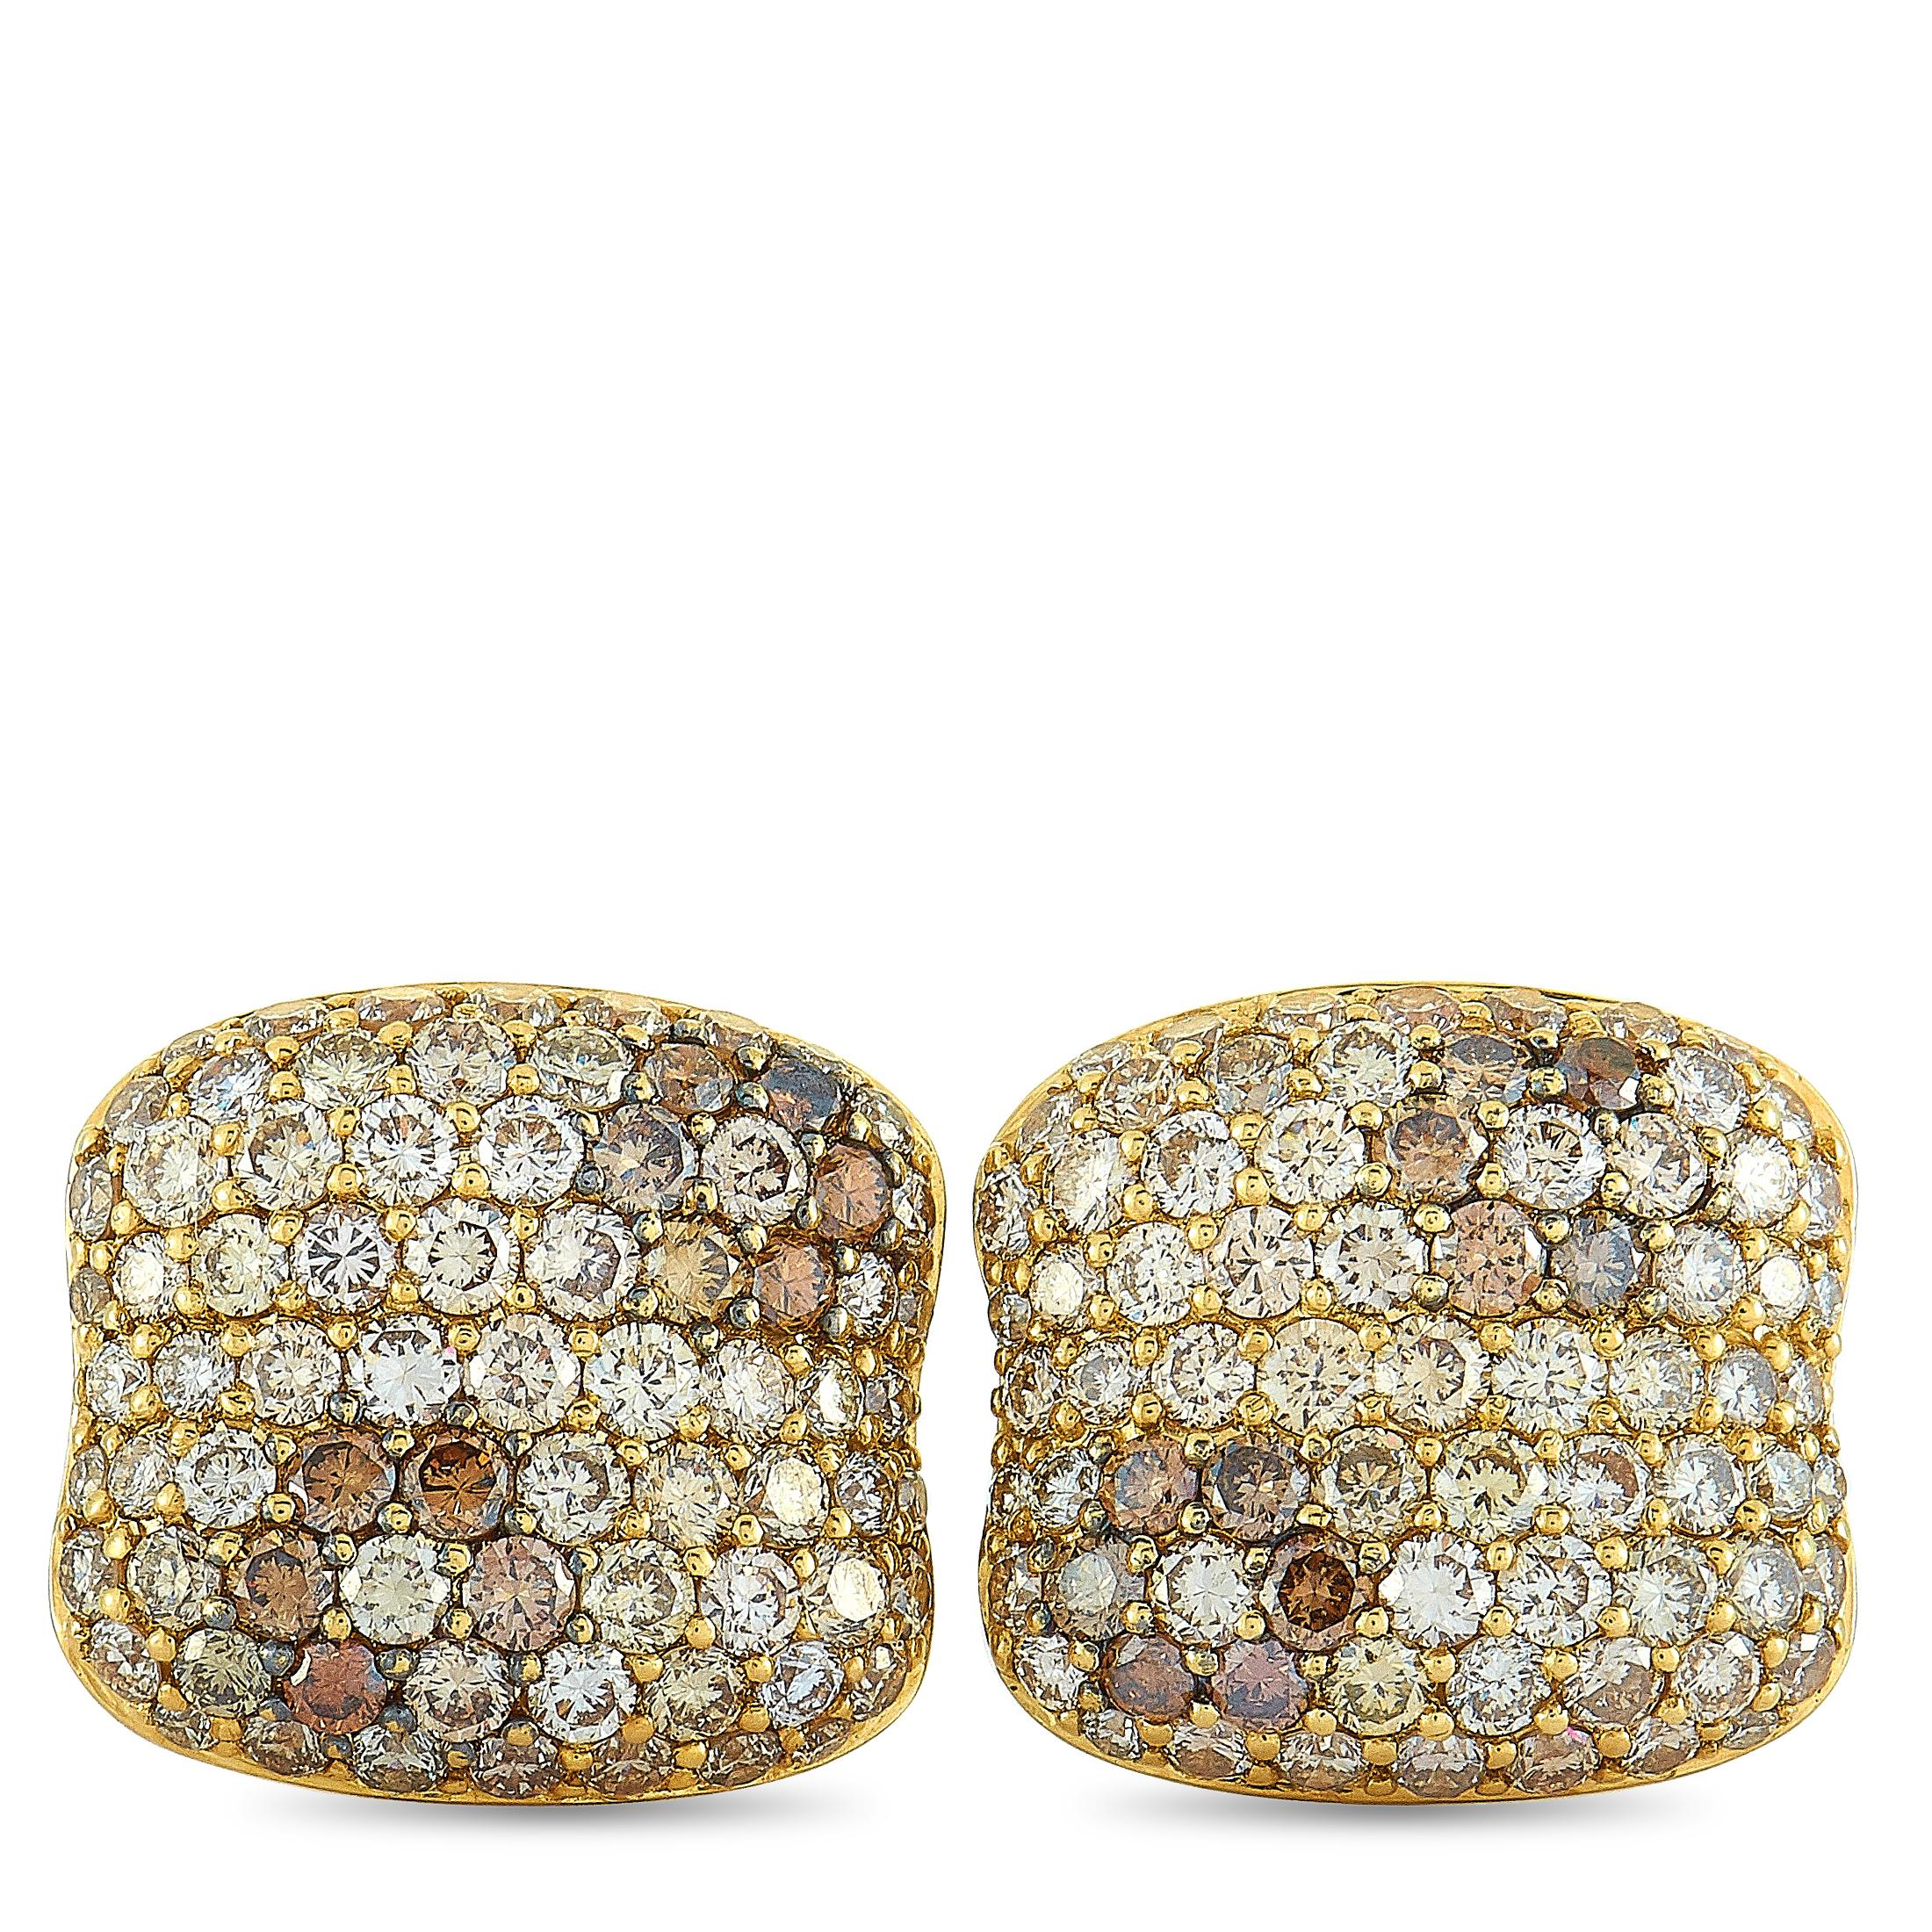 These Roberto Coin cufflinks are made of 18K yellow gold and each weighs 7.8 grams, measuring 0.60” in length and 0.62” in width. The cufflinks are set with diamonds that amount to 4.25 carats.

Offered in brand new condition, this pair of cufflinks